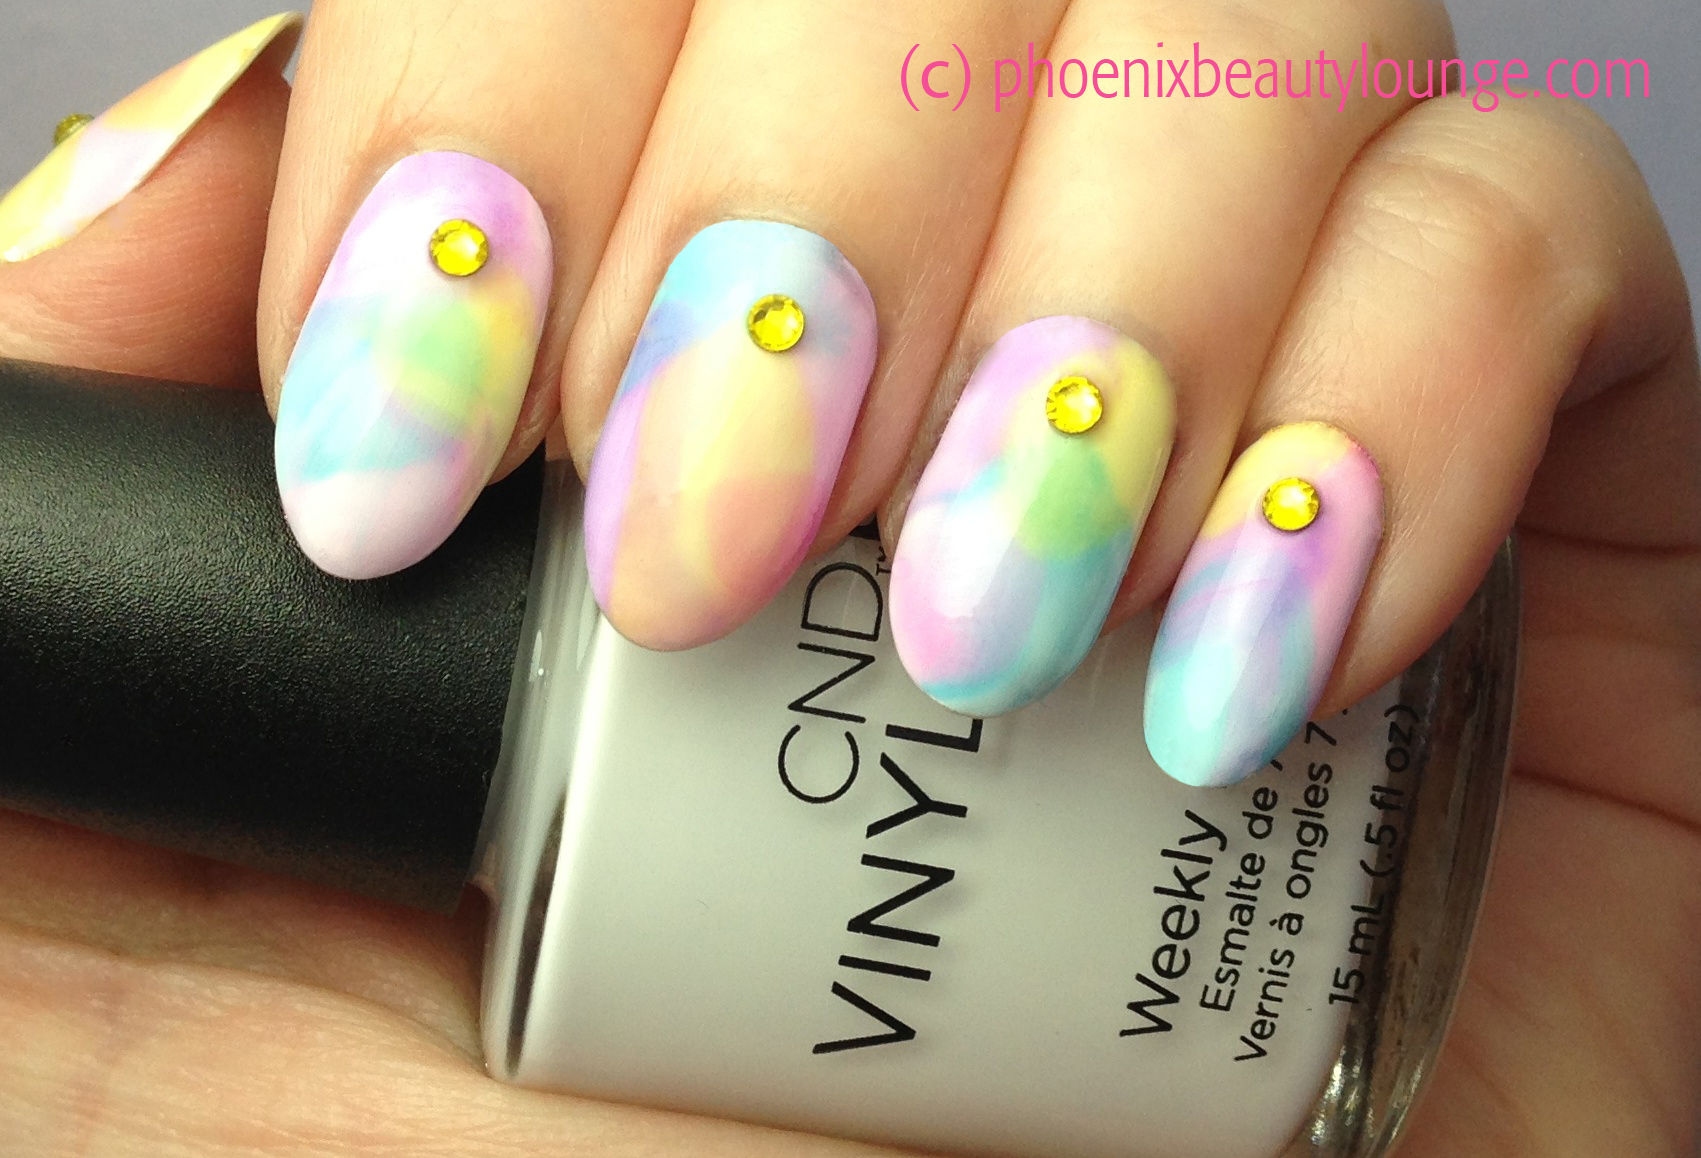 10. Watercolor Nail Art Inspired by Rapunzel's Paintings - wide 4